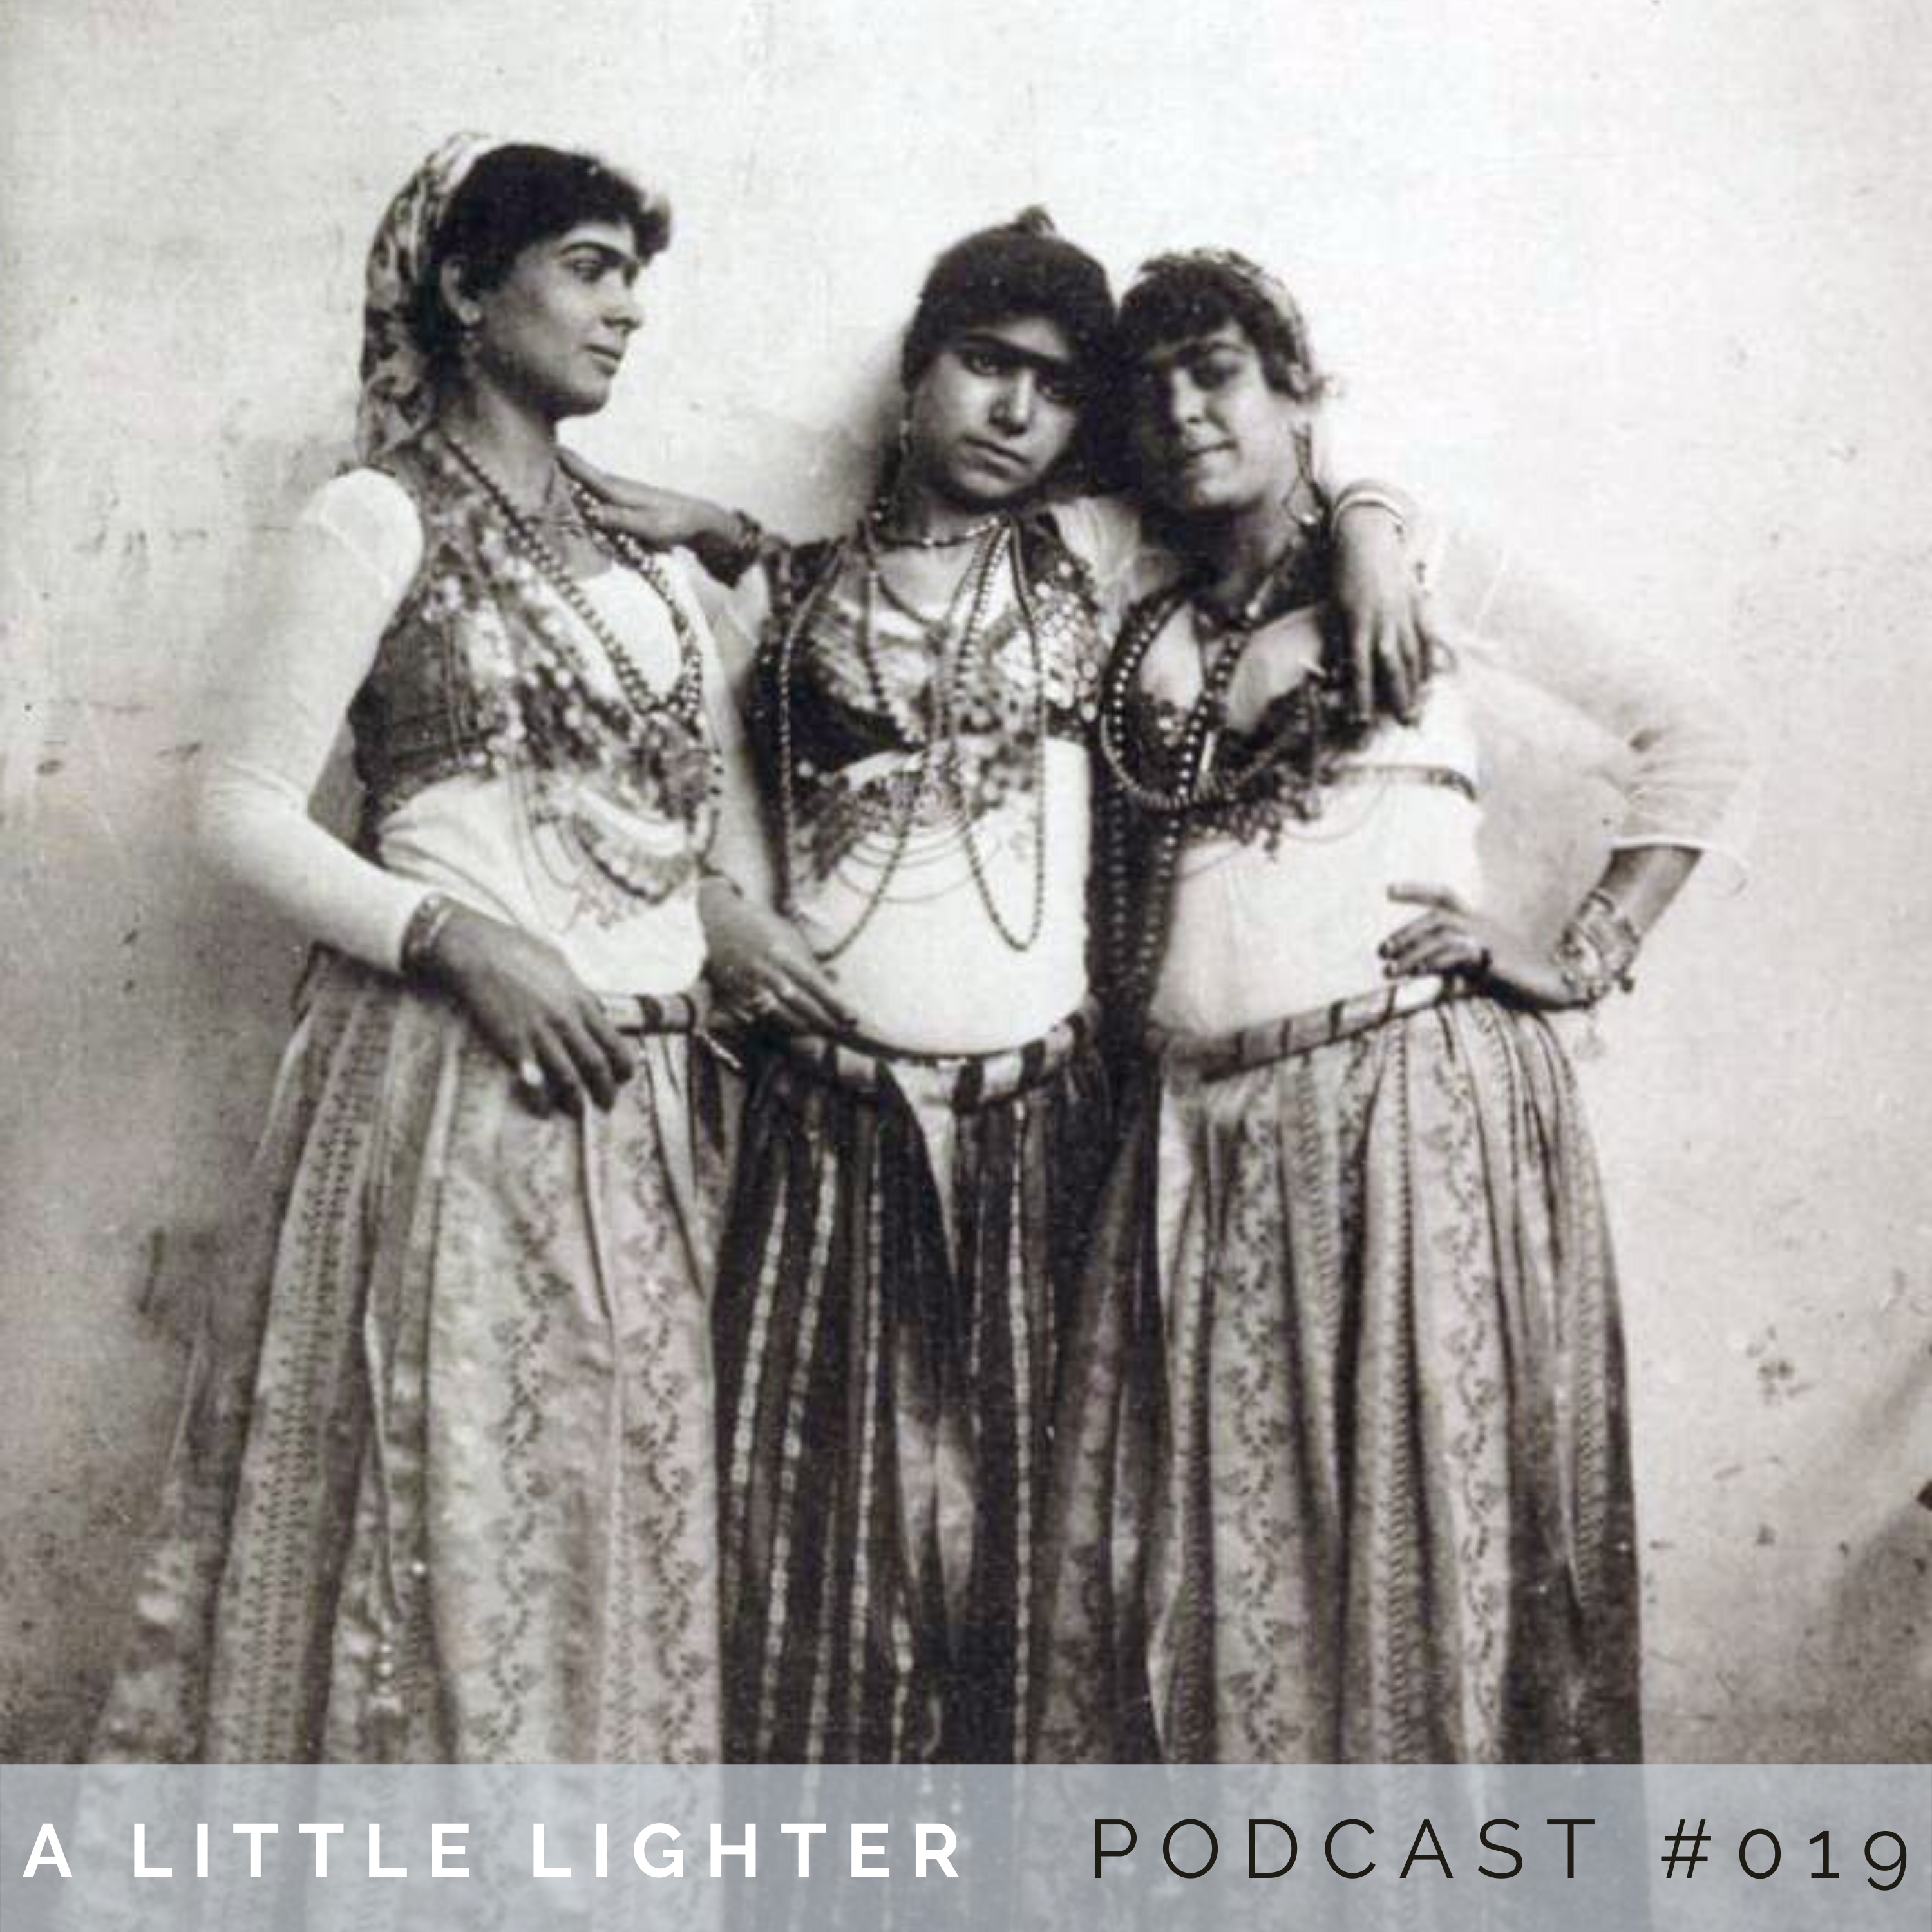 Belly Dance Podcast belly dance history up to the 1900s